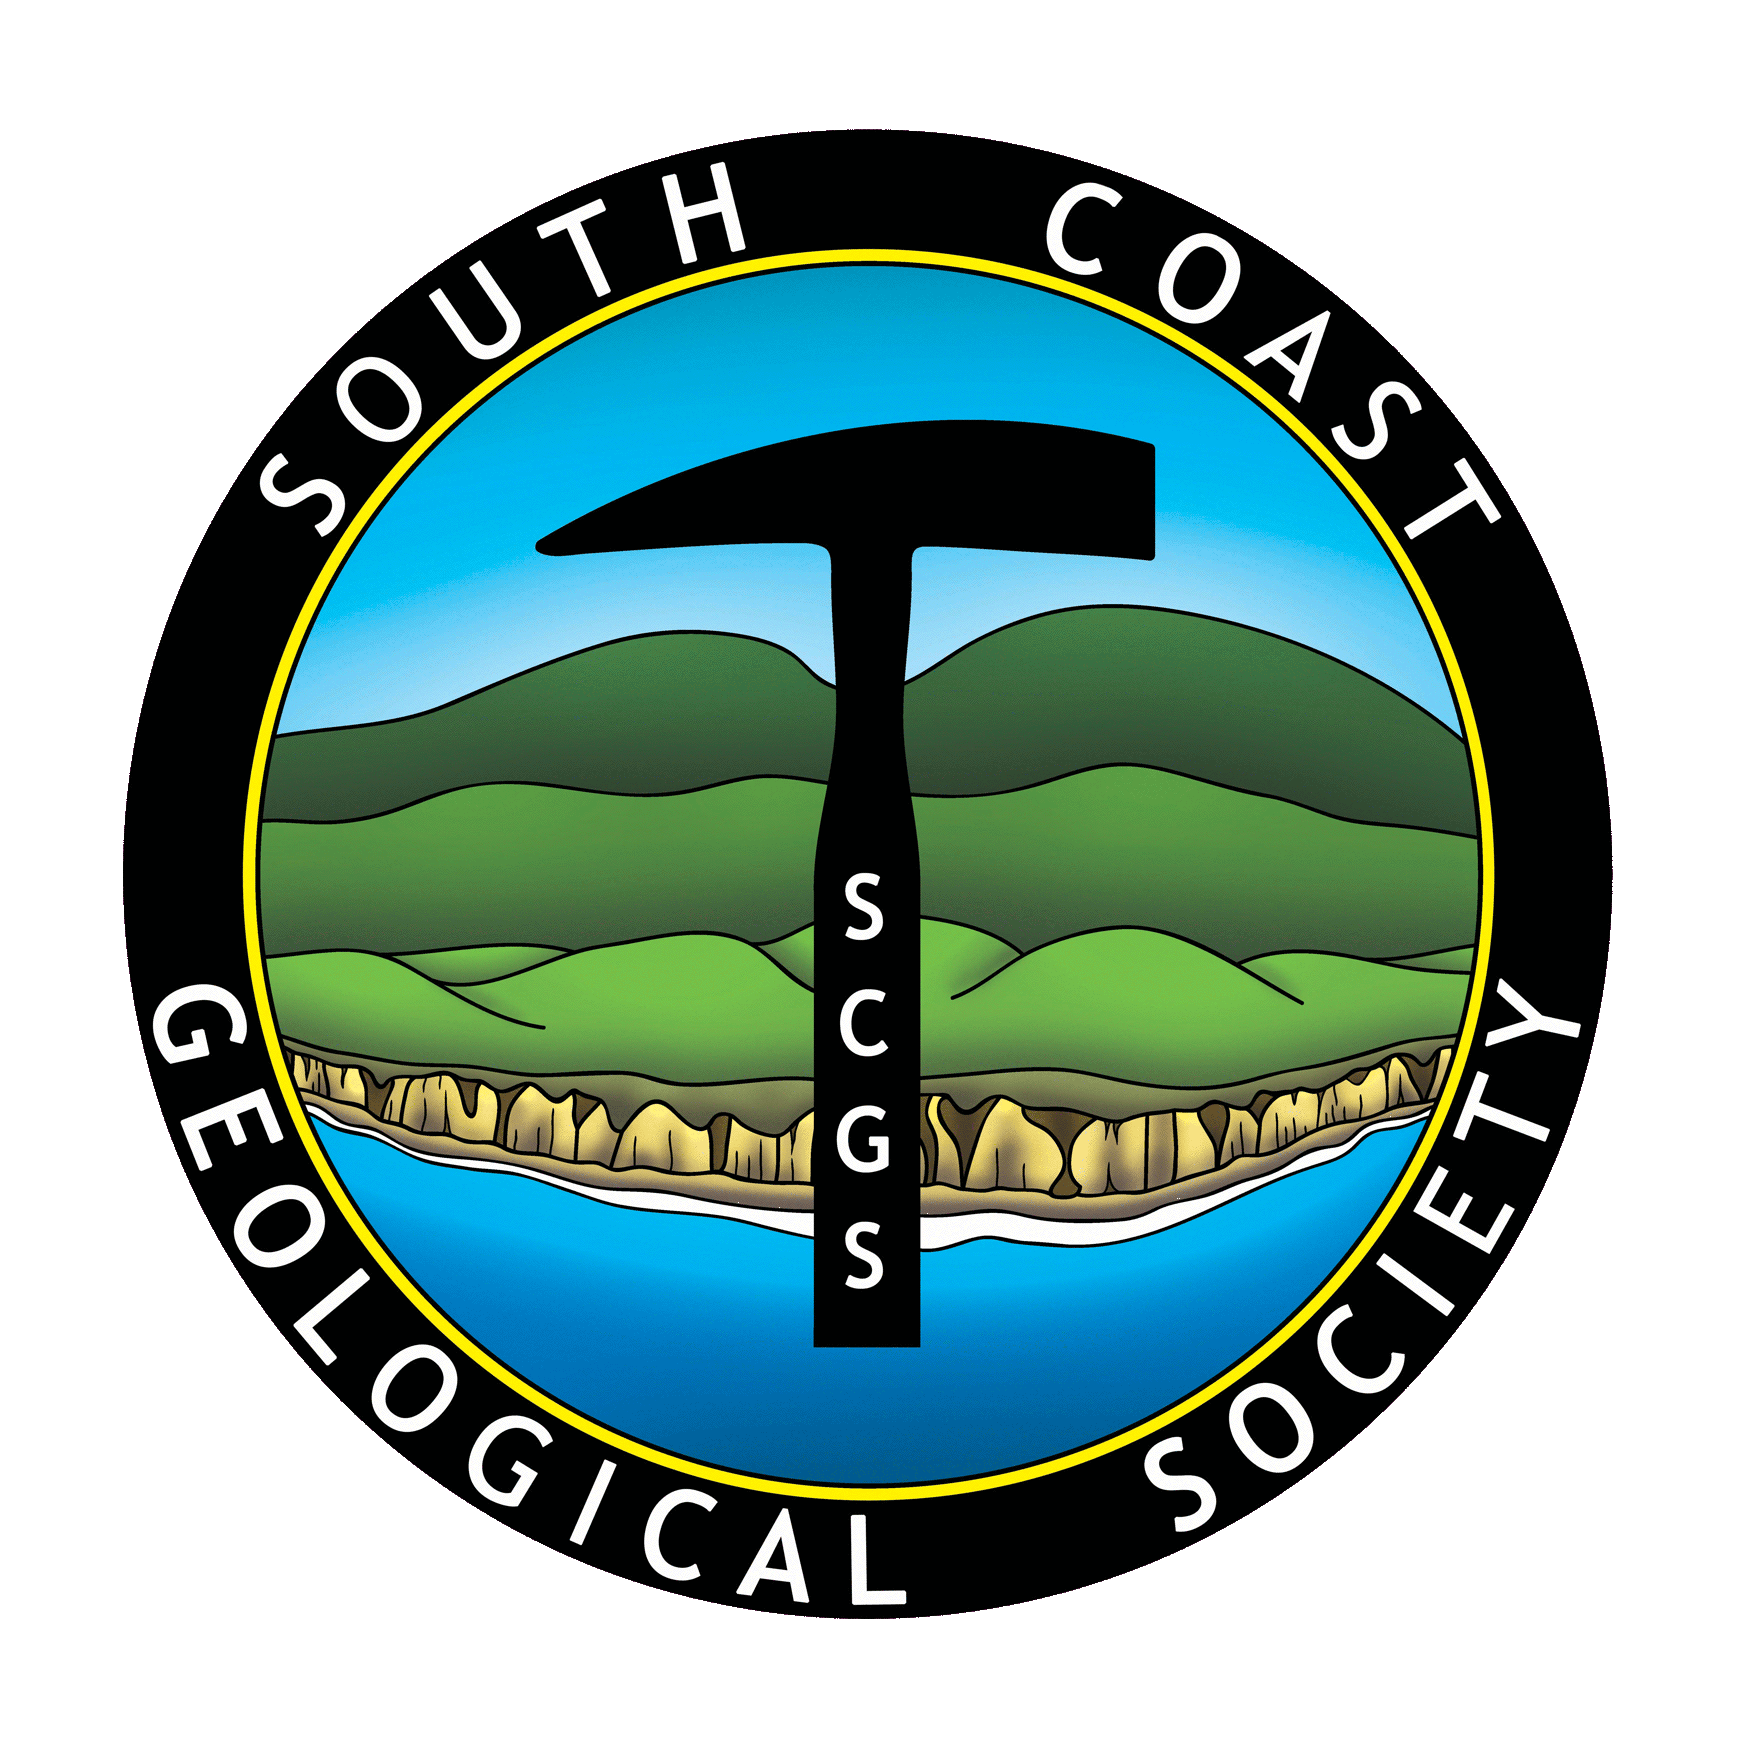 About SCGS South Coast Geological Society